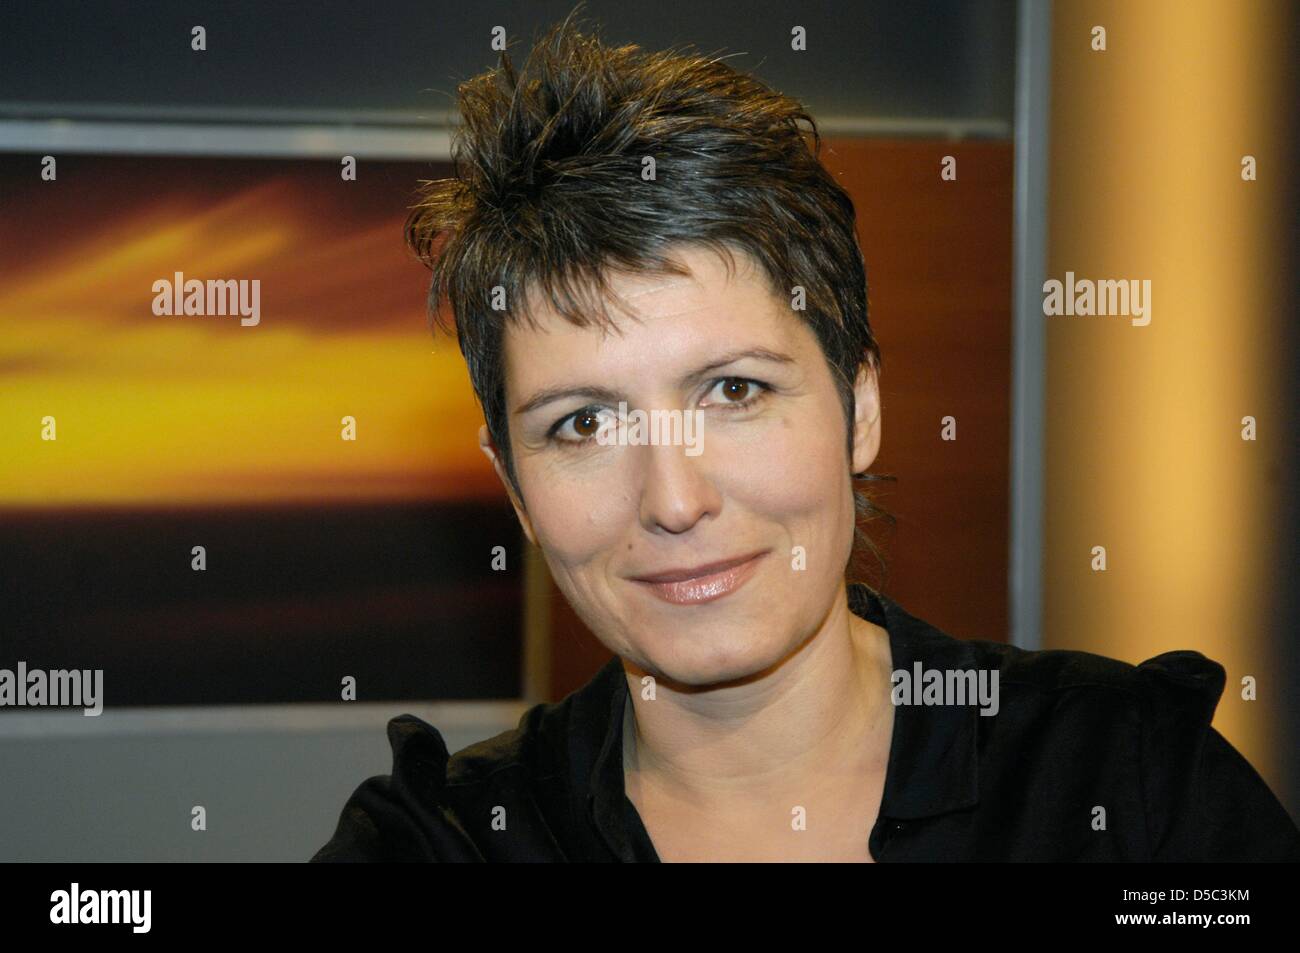 German journalist Ines Pohl, head editor of German daily 'tageszeitung' (taz),  pictured during the taping of TV talk show 'Nightstudio' in Berlin, Germany, 27 January 2010. The talk show themed 'Agenda 2010 - how did it change our country?' will be aired by public broadcaster ZDF on 31 January 2010. Photo: Karlheinz Schindler Stock Photo